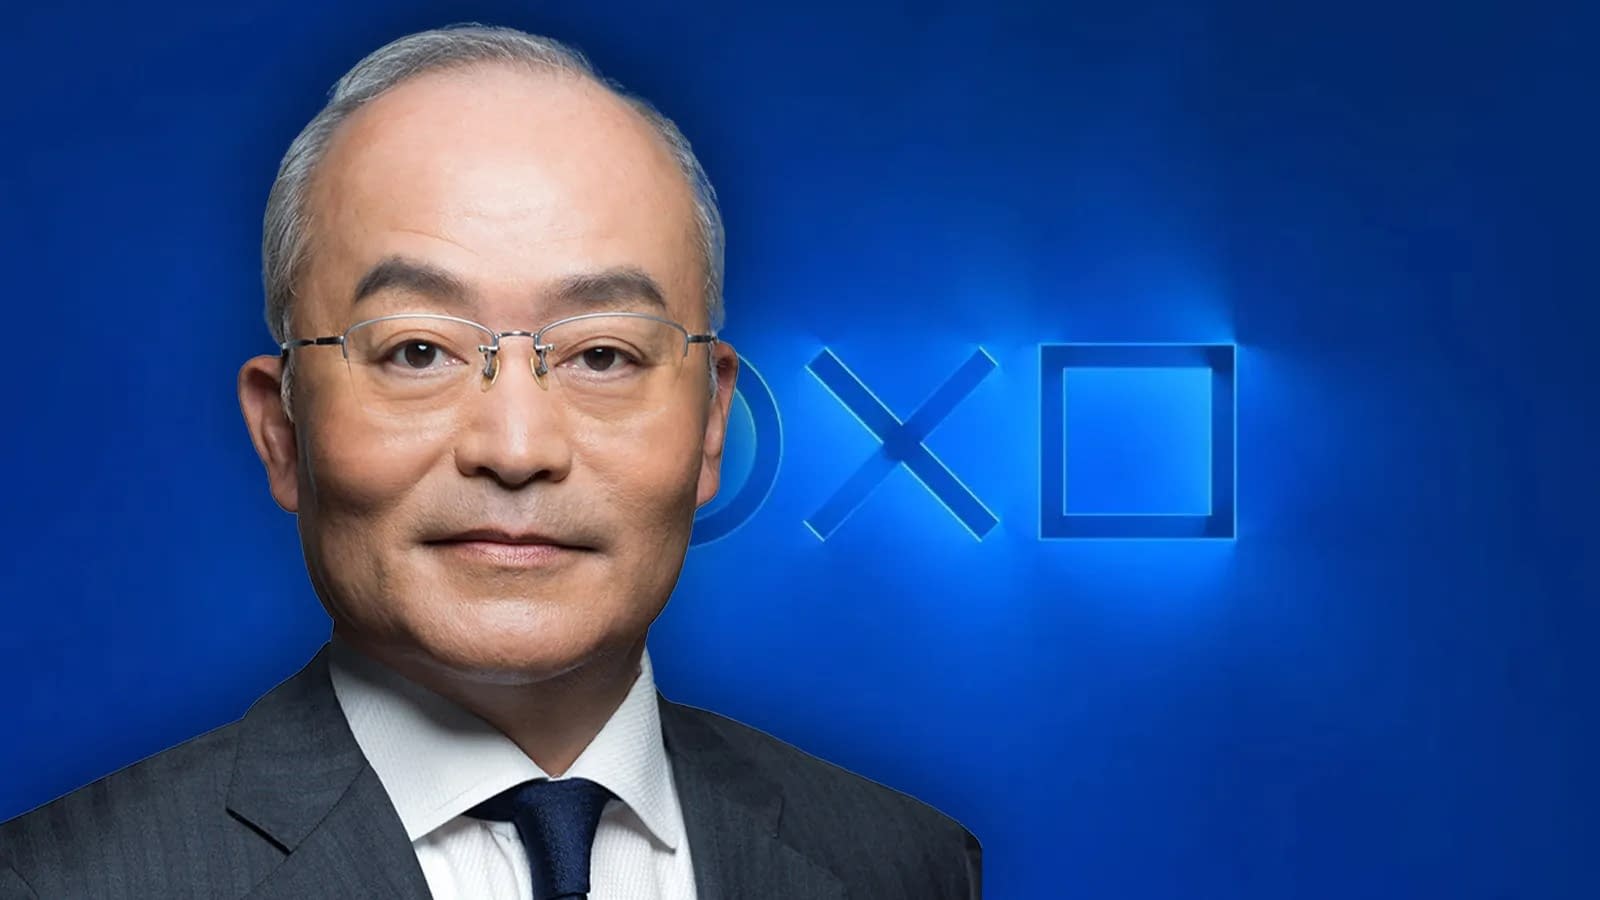 New Period Started in PlayStation: Temporary CEO Started